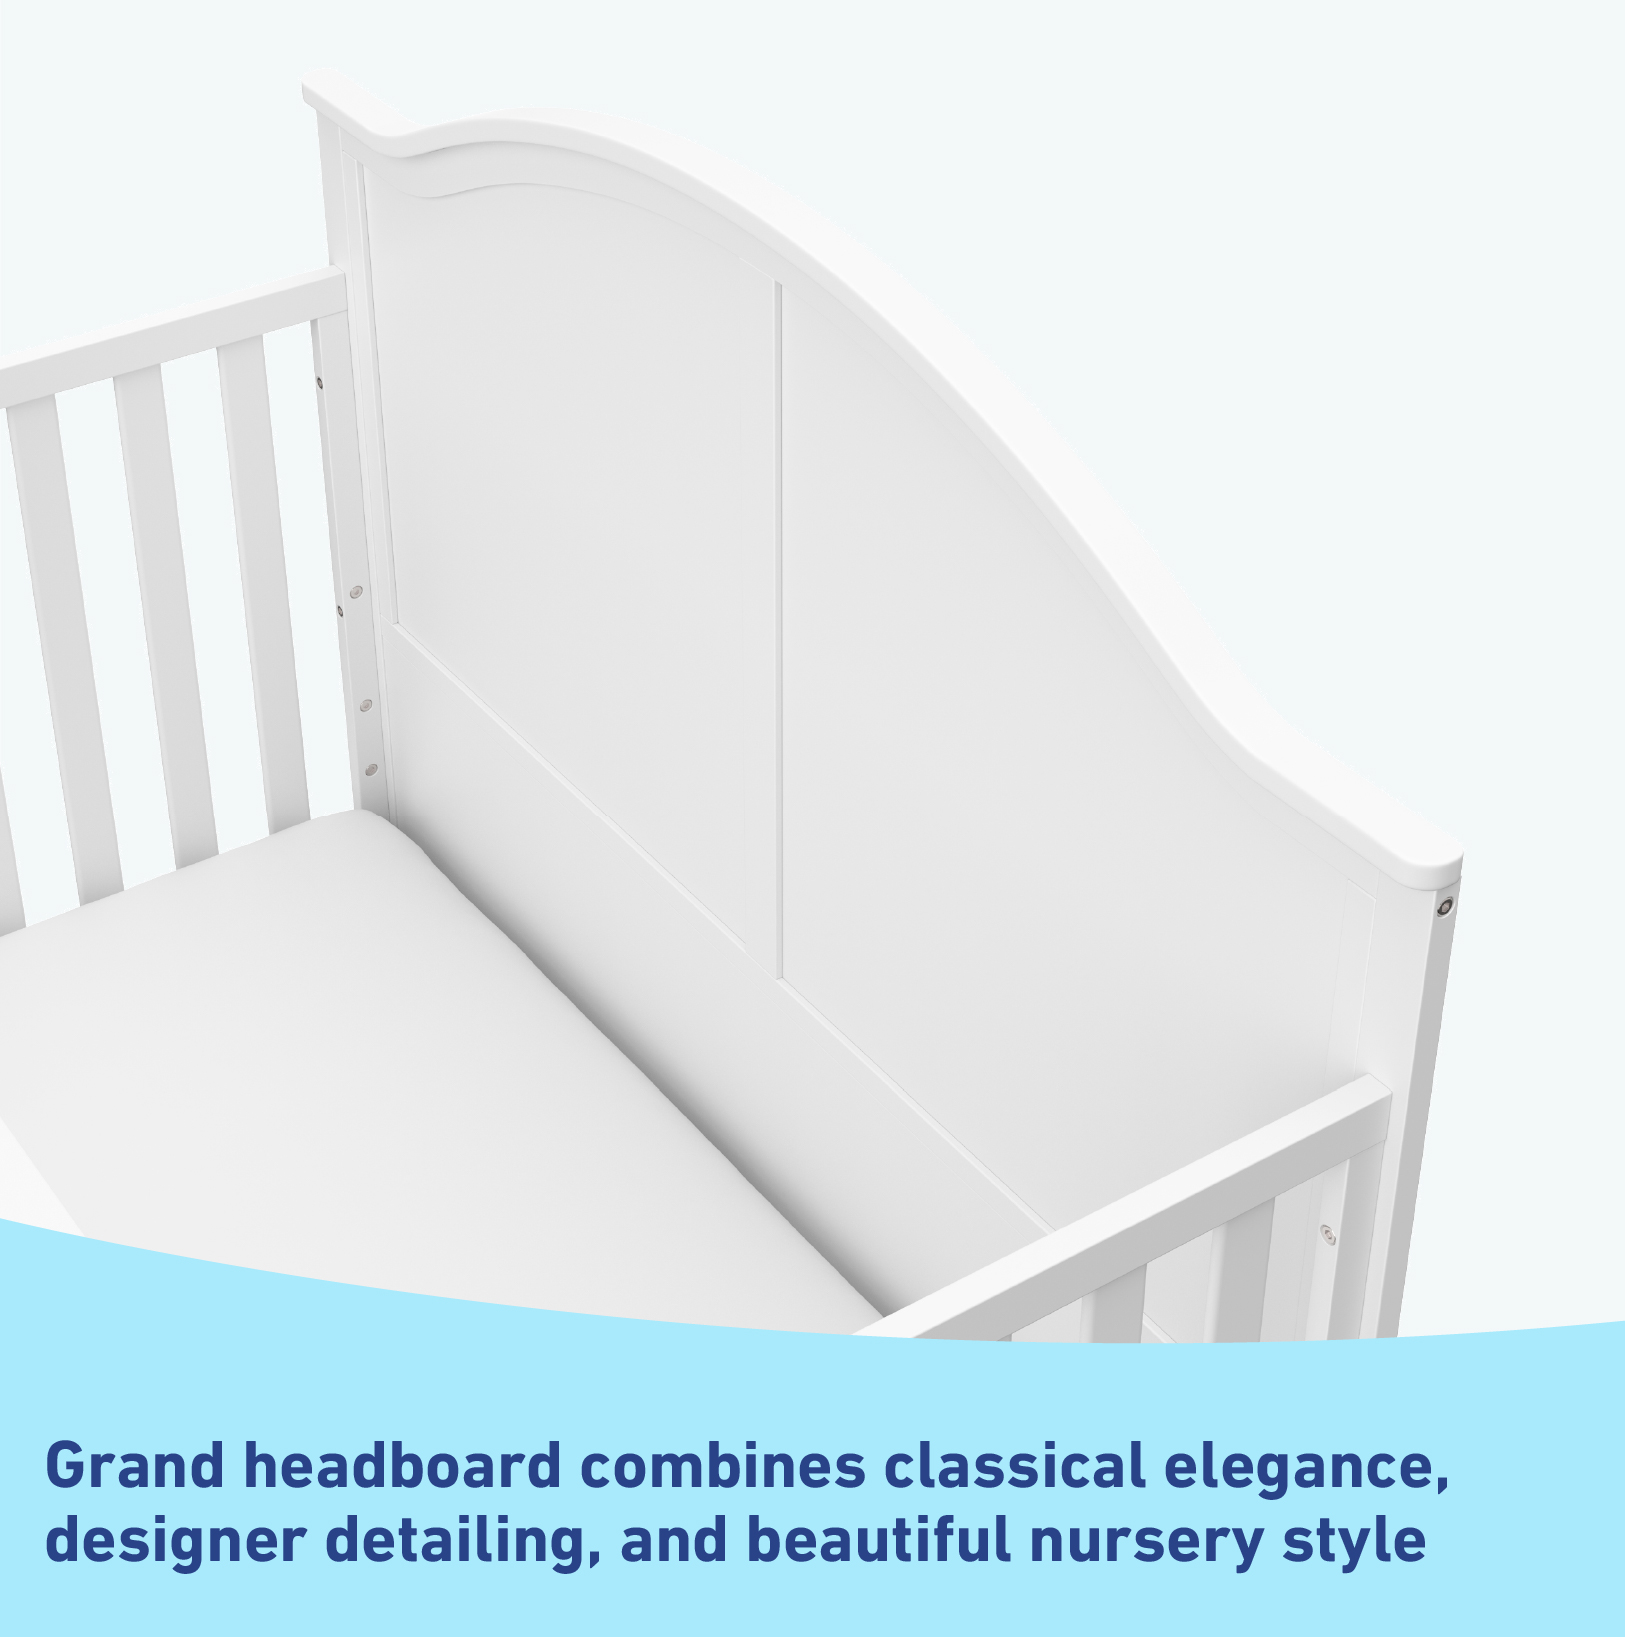 Graco Wilfred 5-in-1 Convertible Baby Crib, White - image 5 of 12